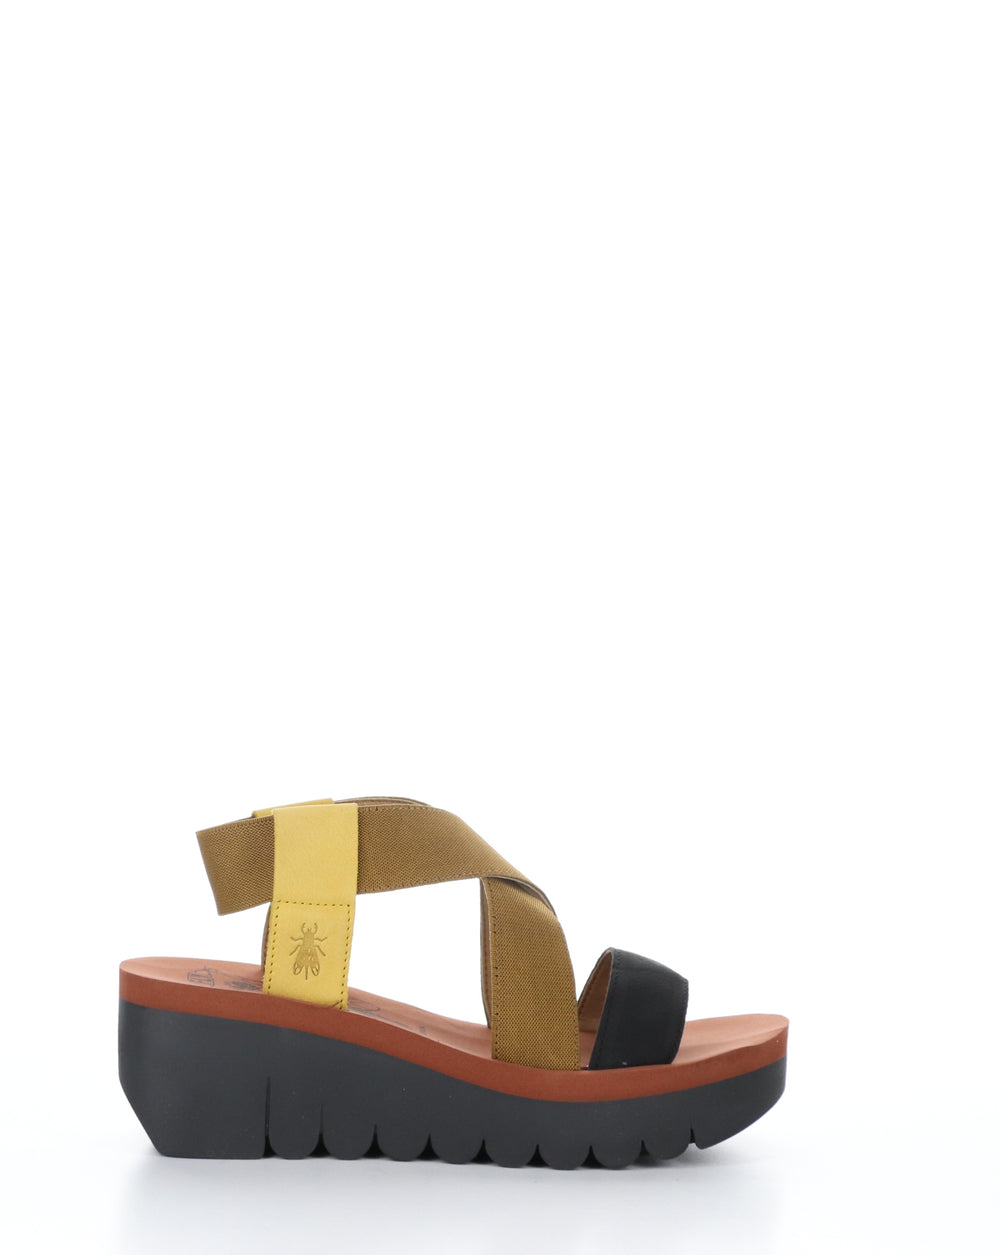 YABY922FLY 002 BUMBLEBEE/CAMBLK Elasticated Sandals